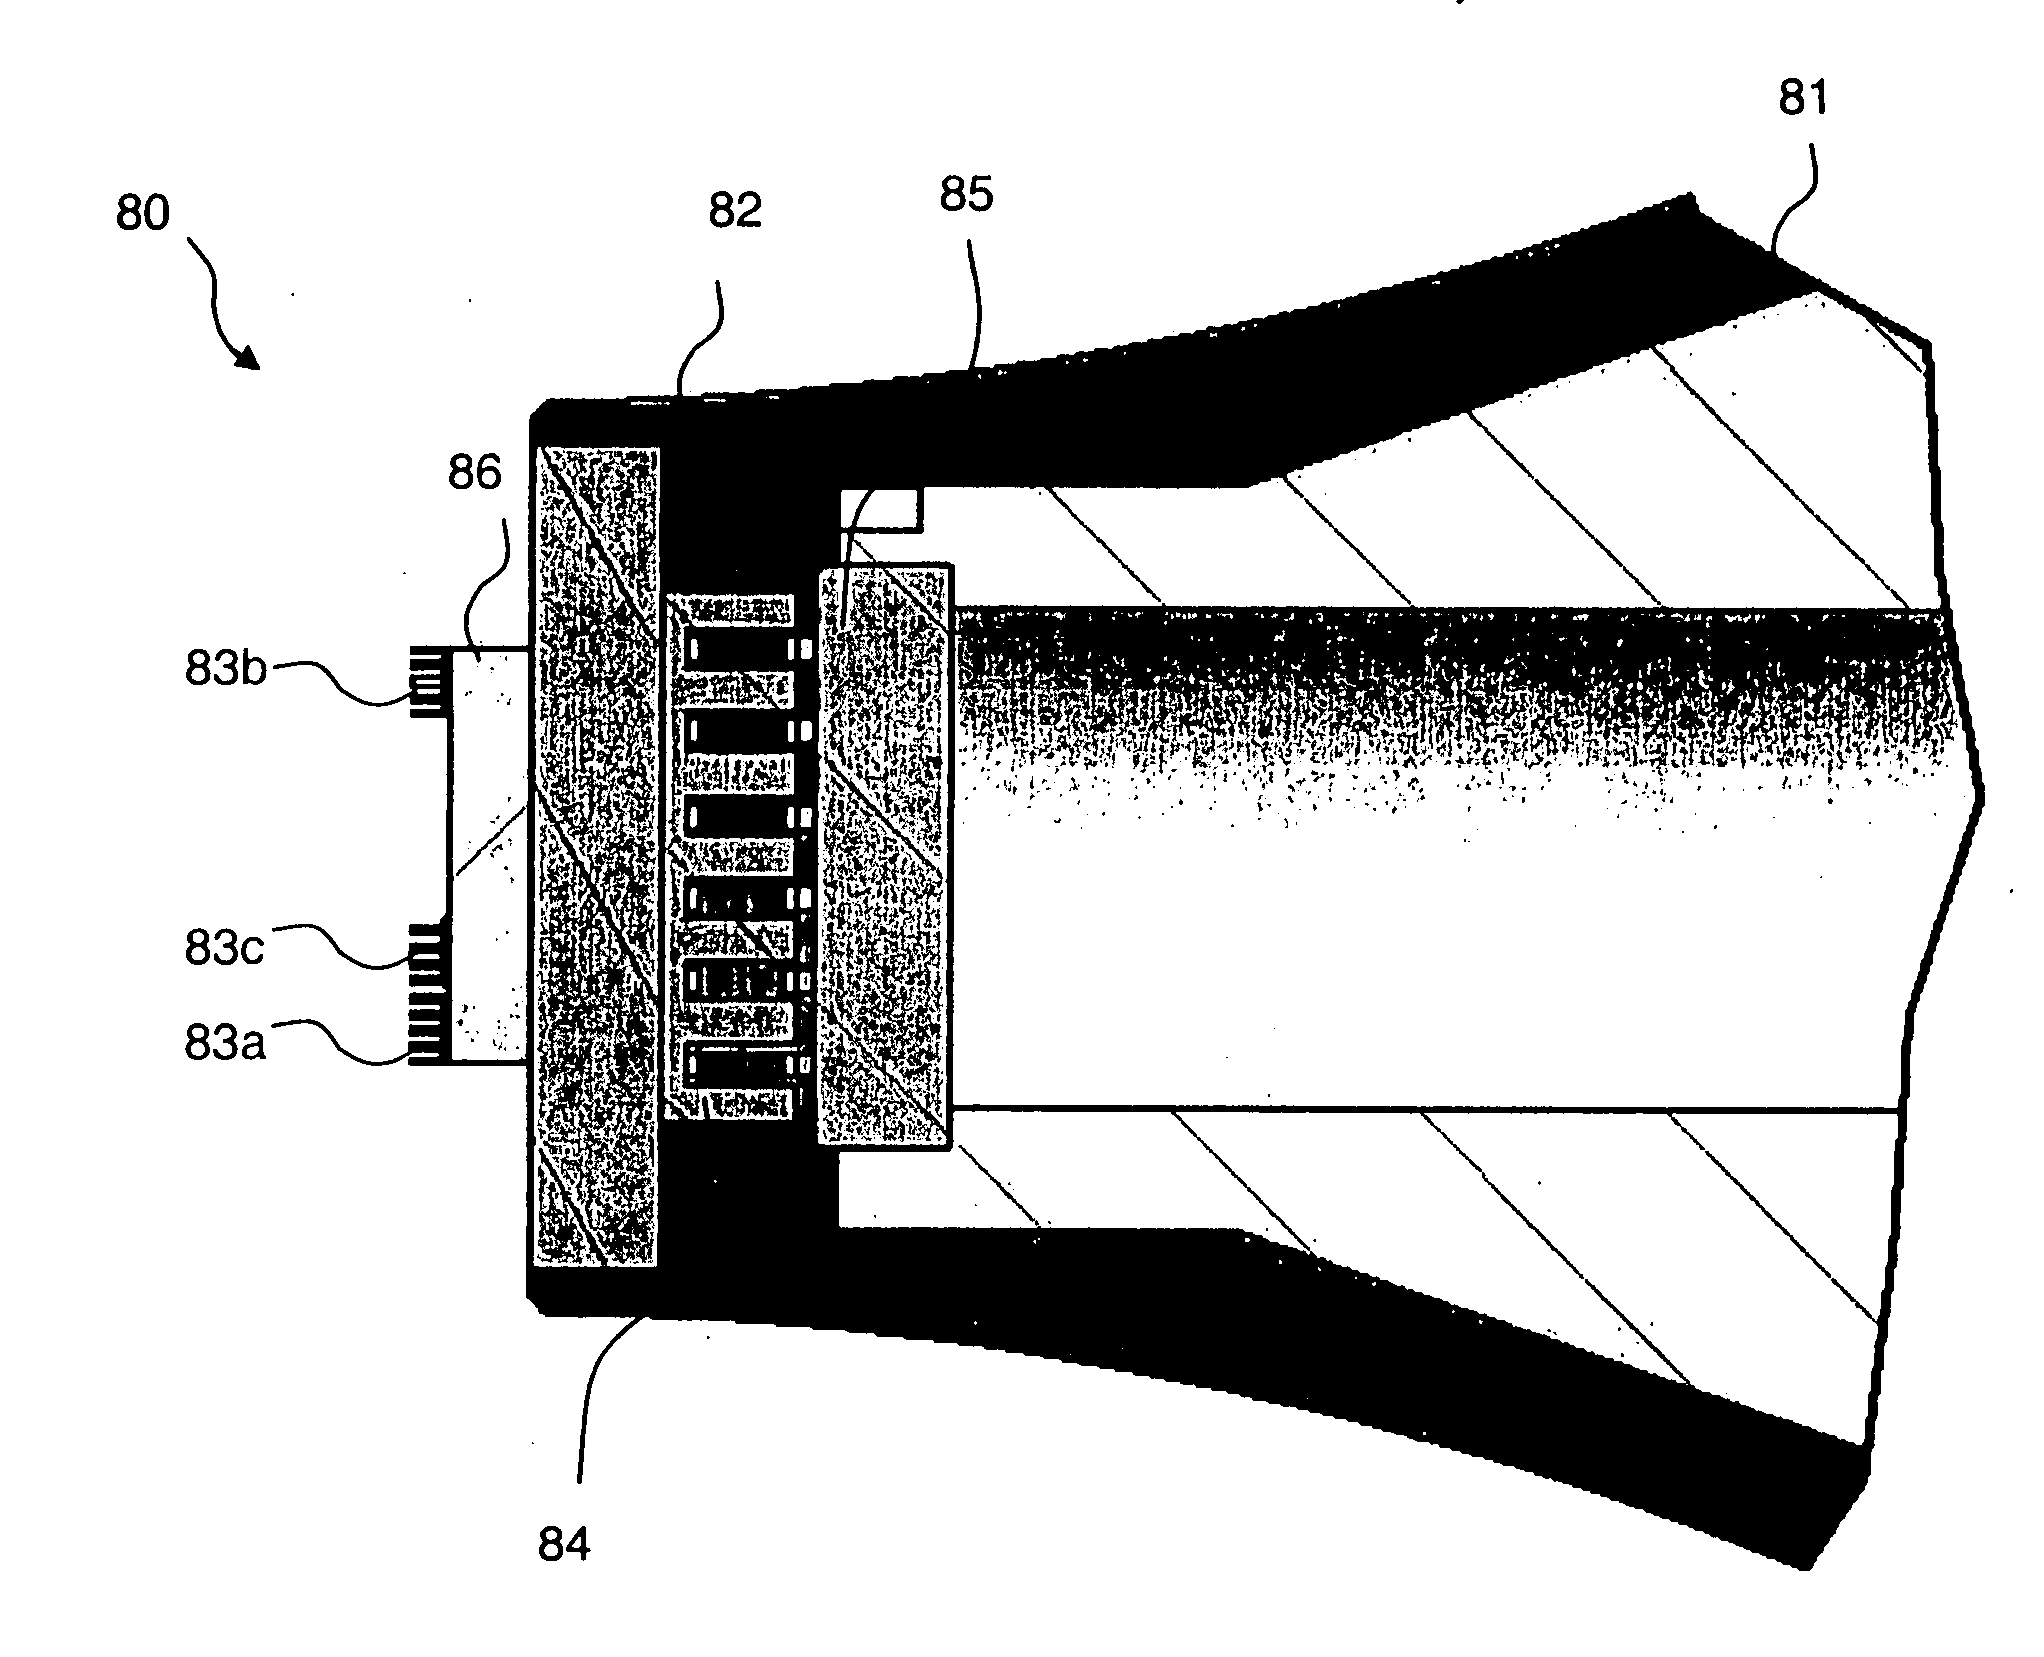 Medical apparatus for determination of biological conditions using impedance measurements